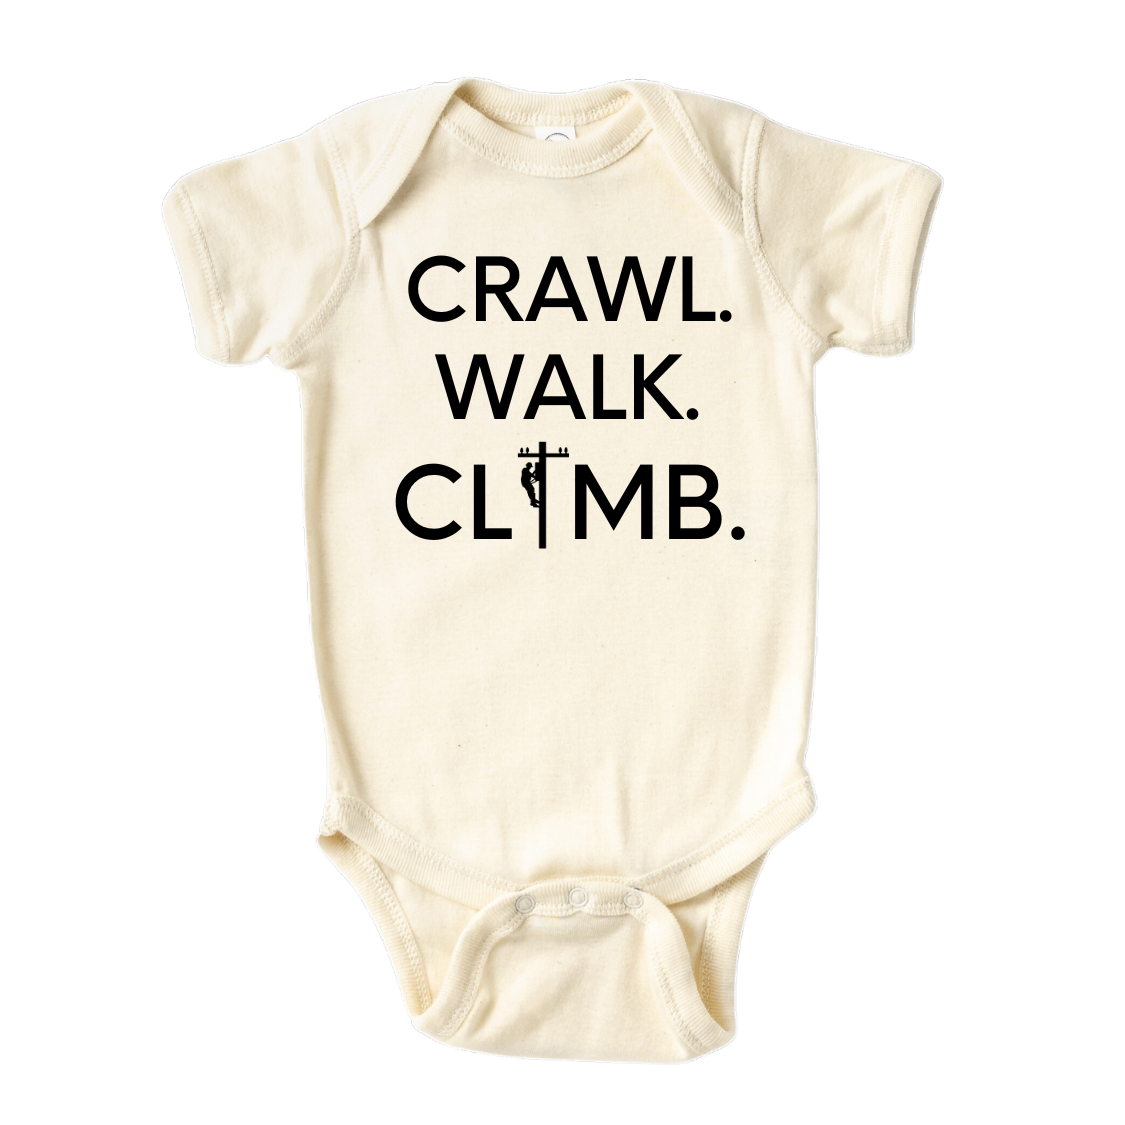 Baby Onesie® Crawl Walk Climb Line Crew Baby Infant Clothing for Baby Shower Gift